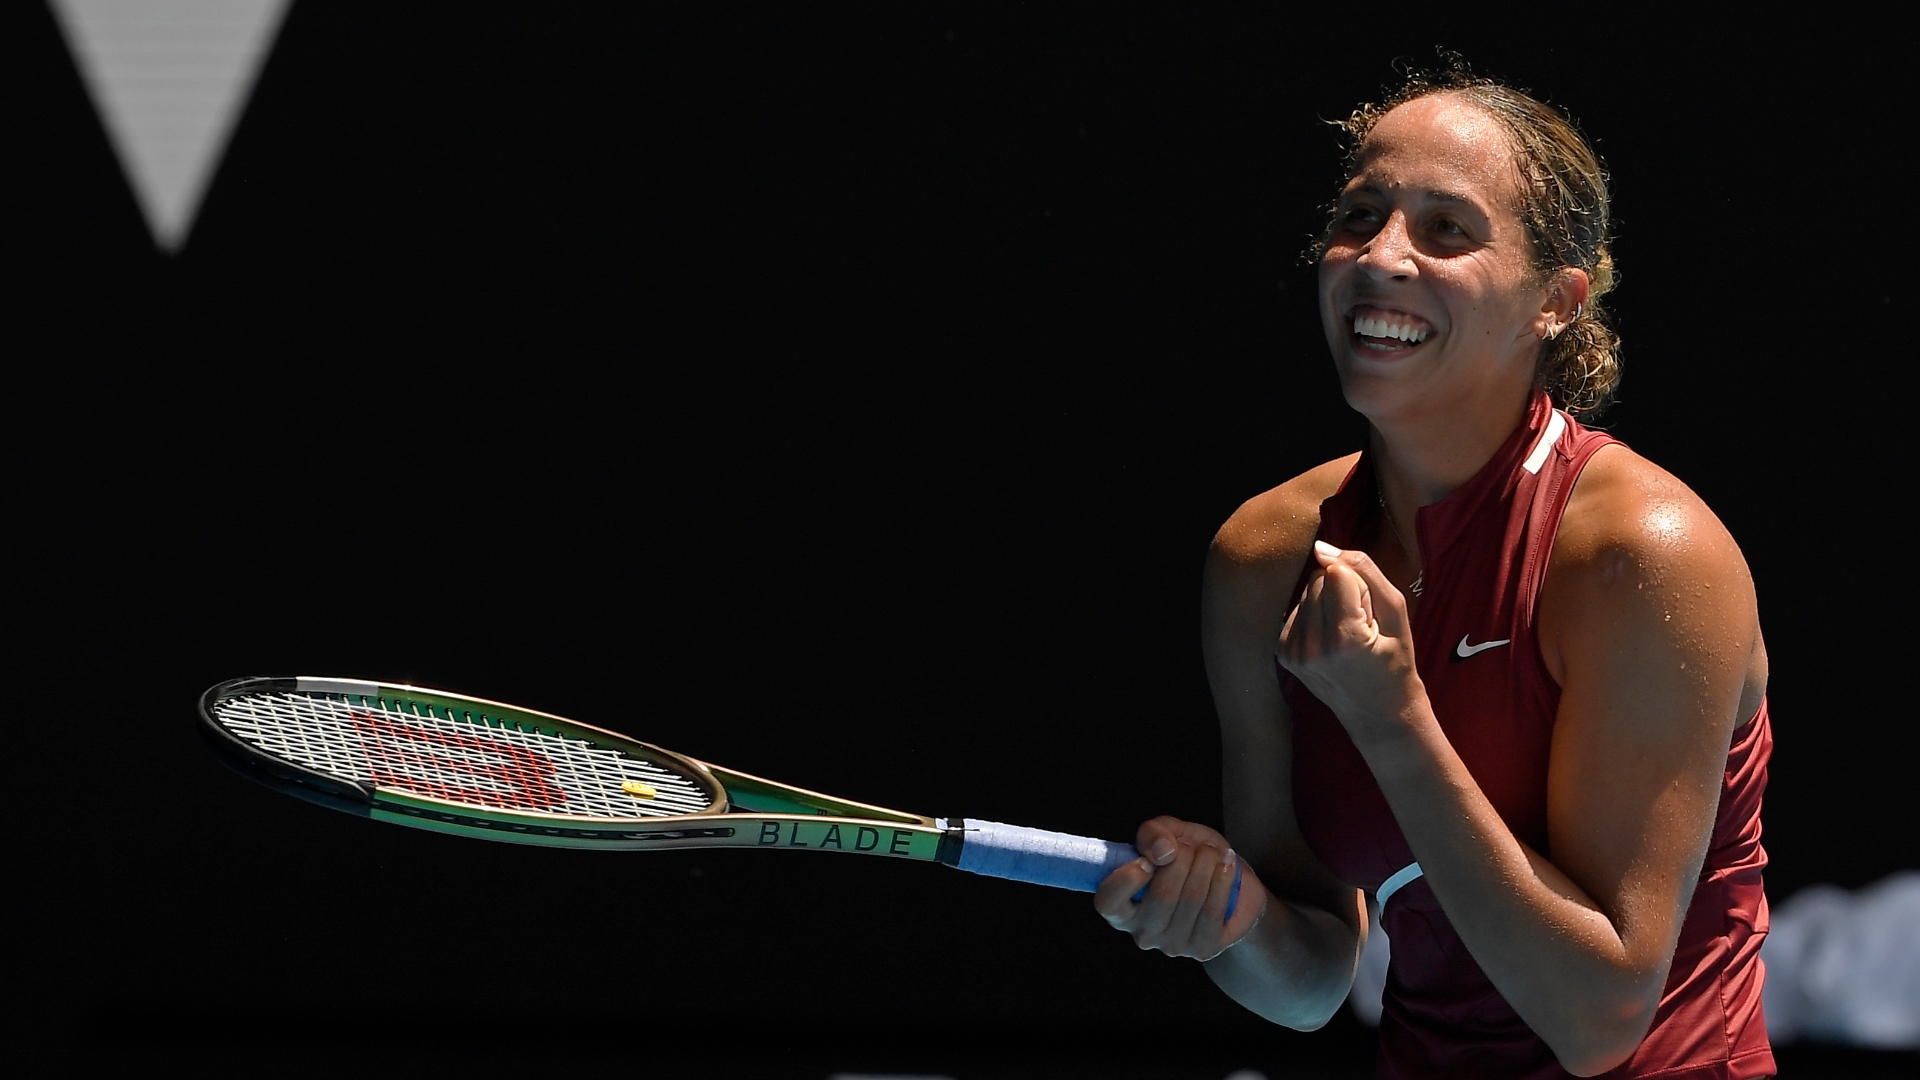 Madison Keys advances to the Australian Open semifinal after straight sets win - Stream the Video